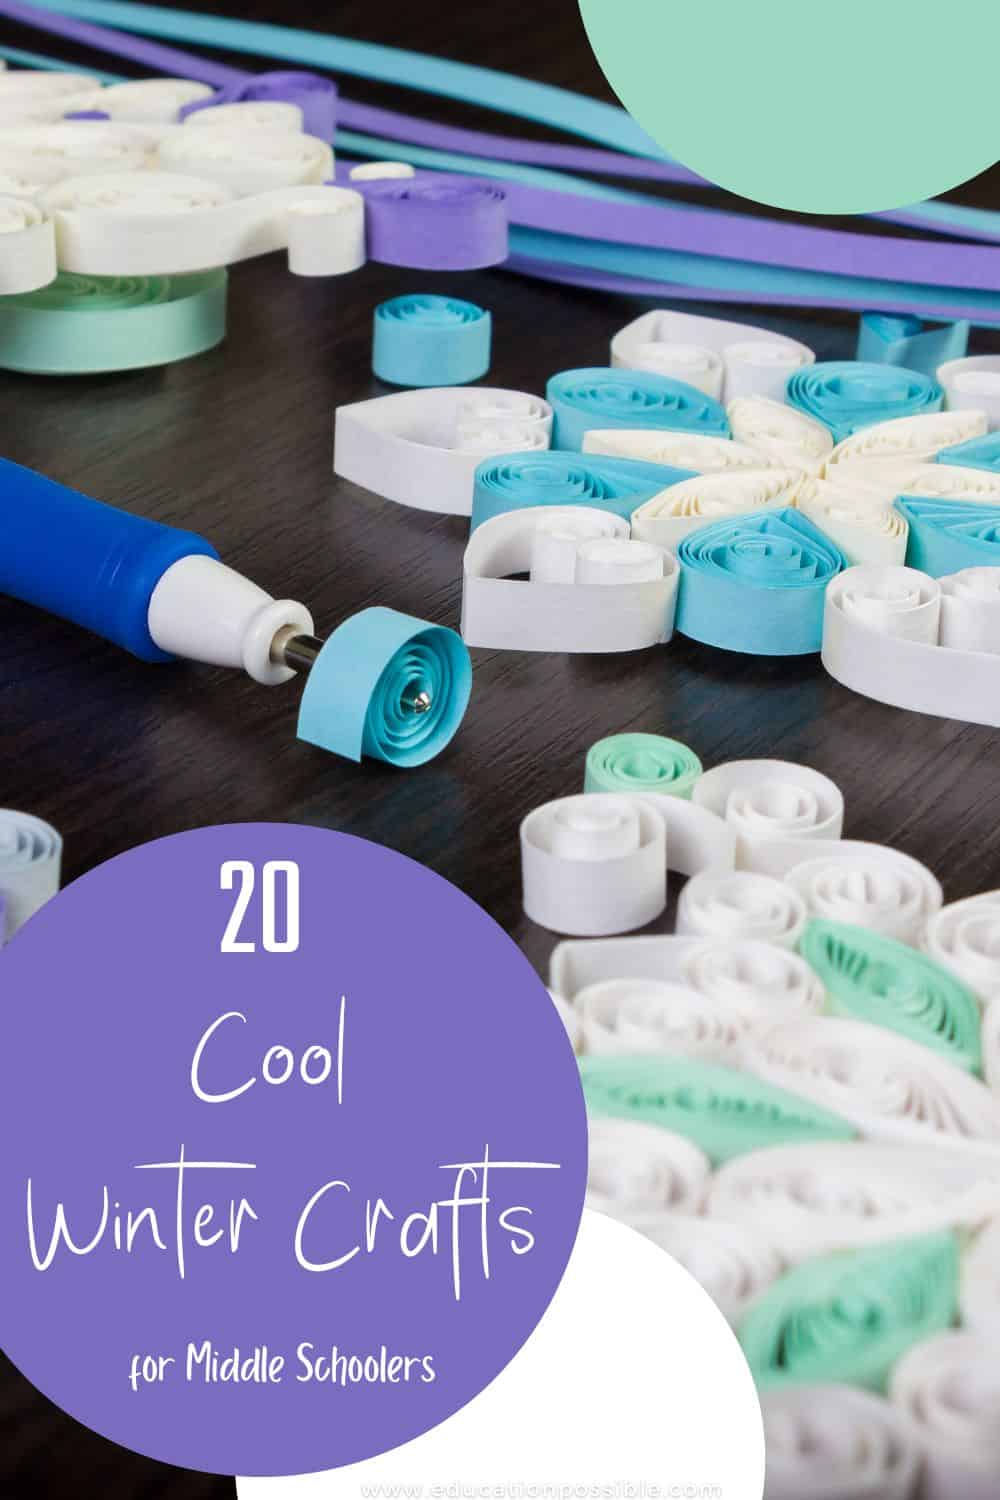 Blue and white, aqua and white, and purple and white quilled snowflakes lying on a table. Paper rolled around a quilling tool.